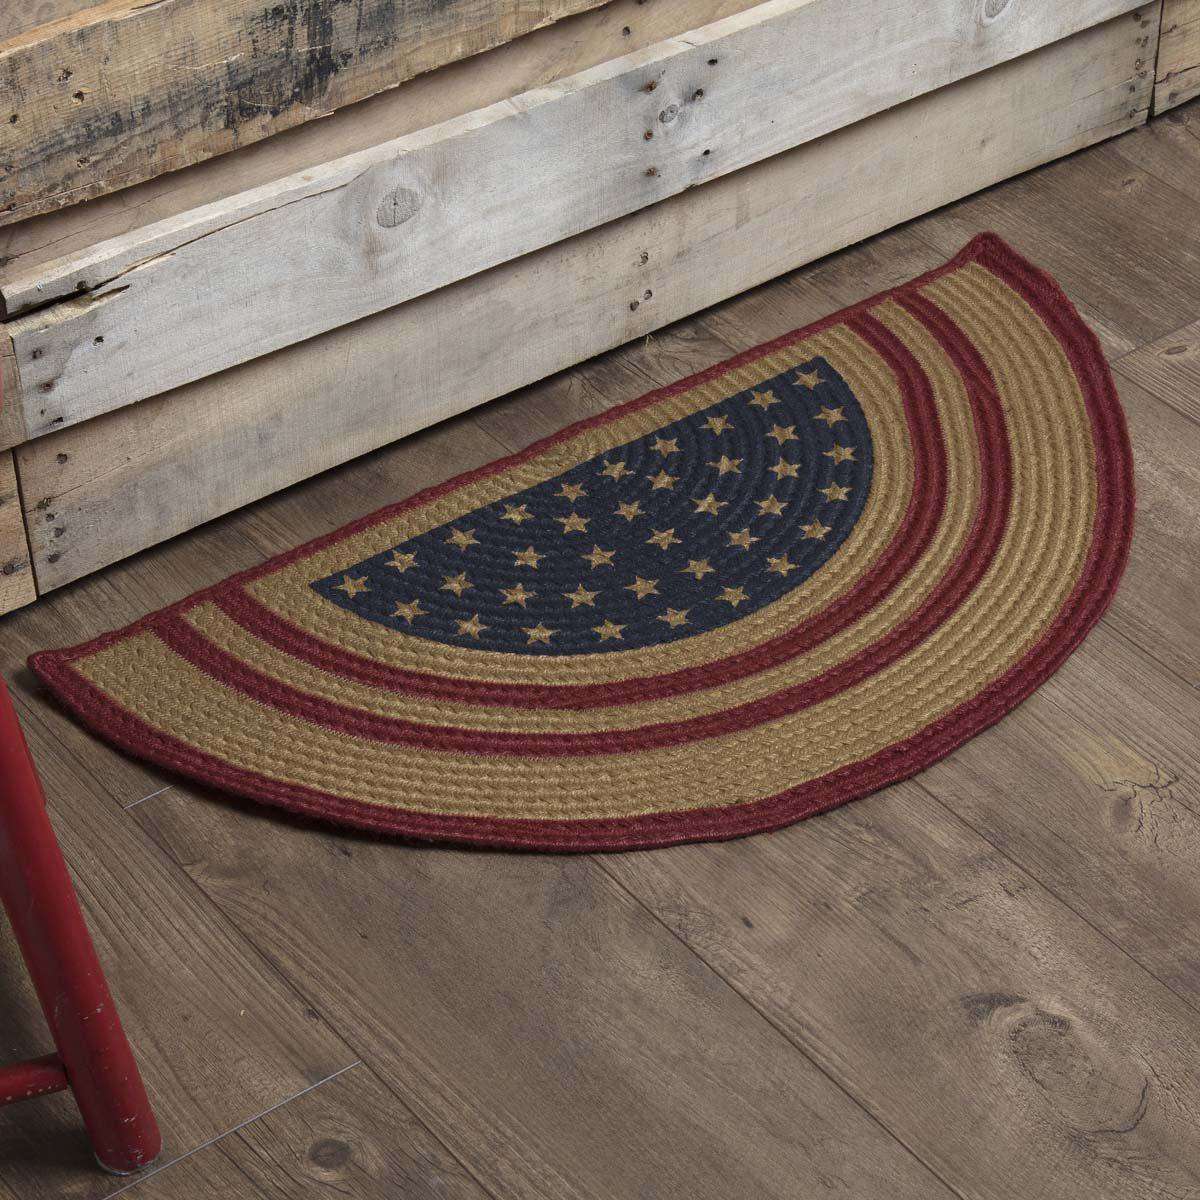 Liberty Stars Flag Jute Braided Rugs Oval/Half Circle VHC Brands rugs VHC Brands 